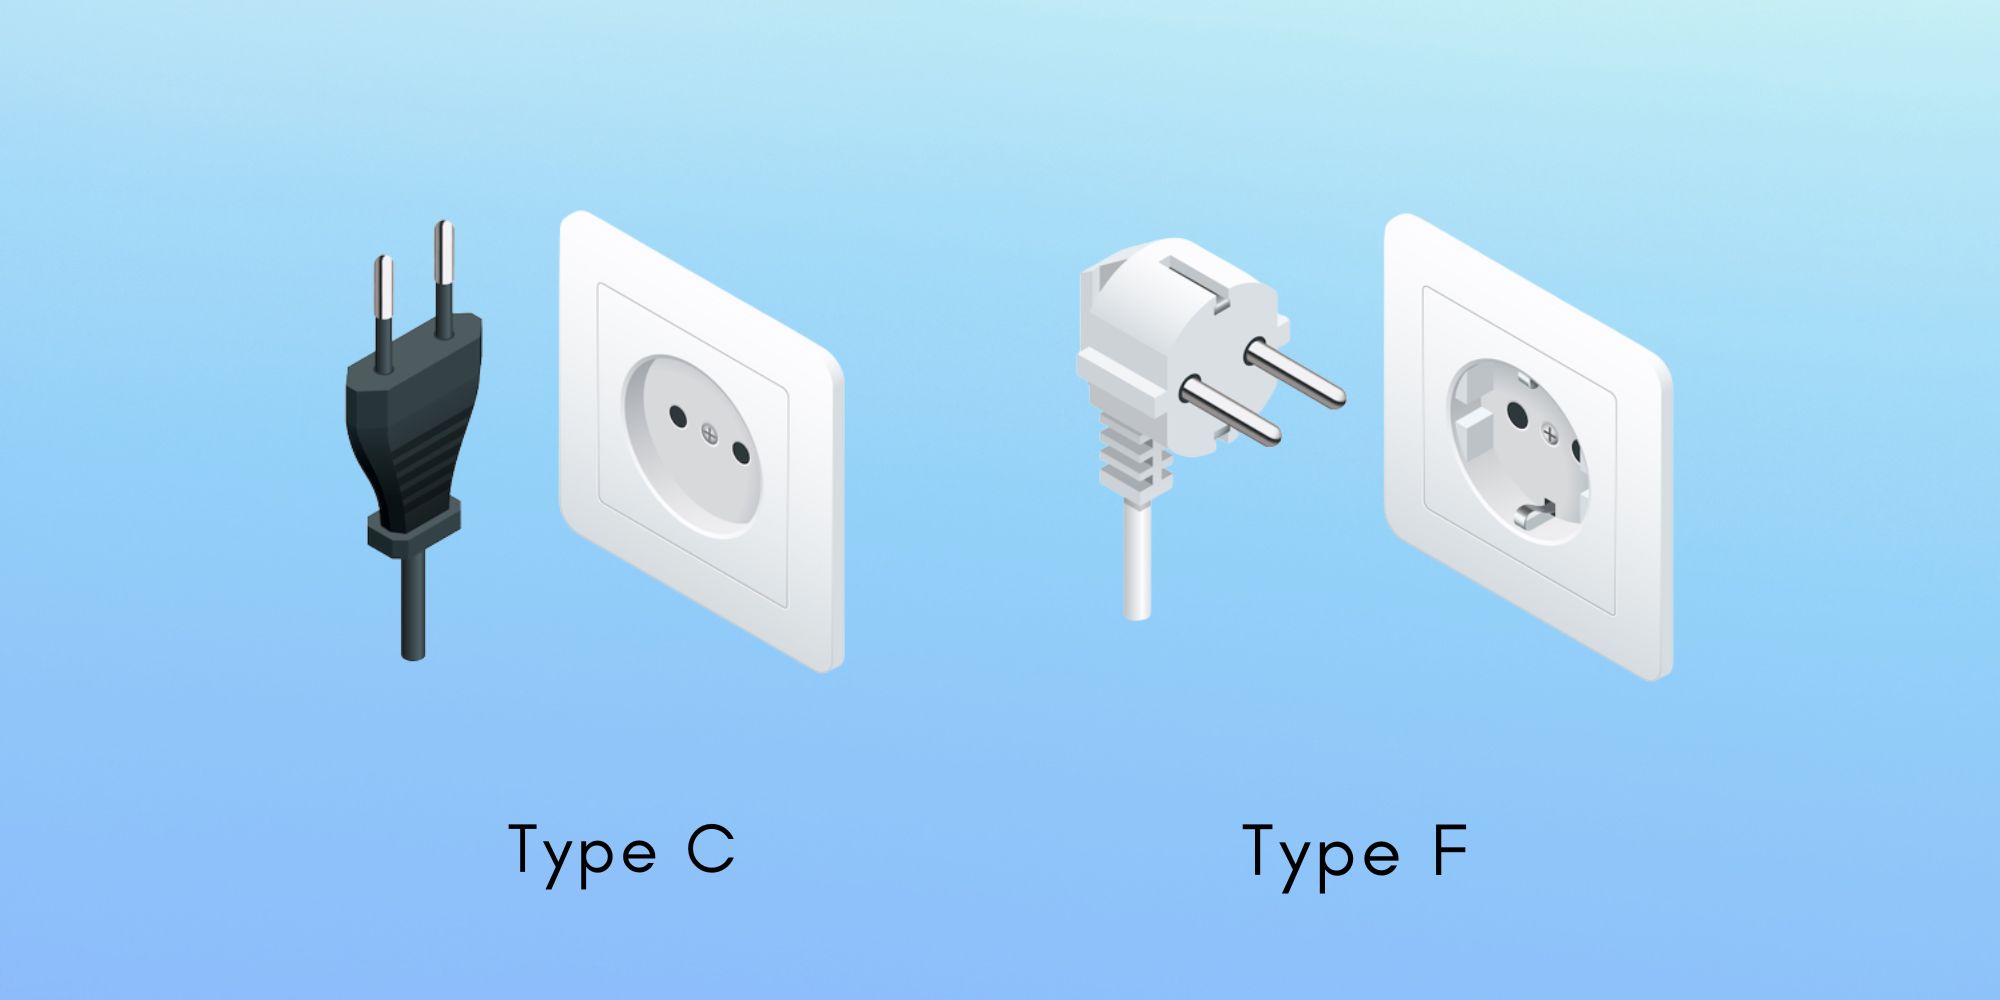 Andorra Power Plugs and Sockets: Type C and Type F
